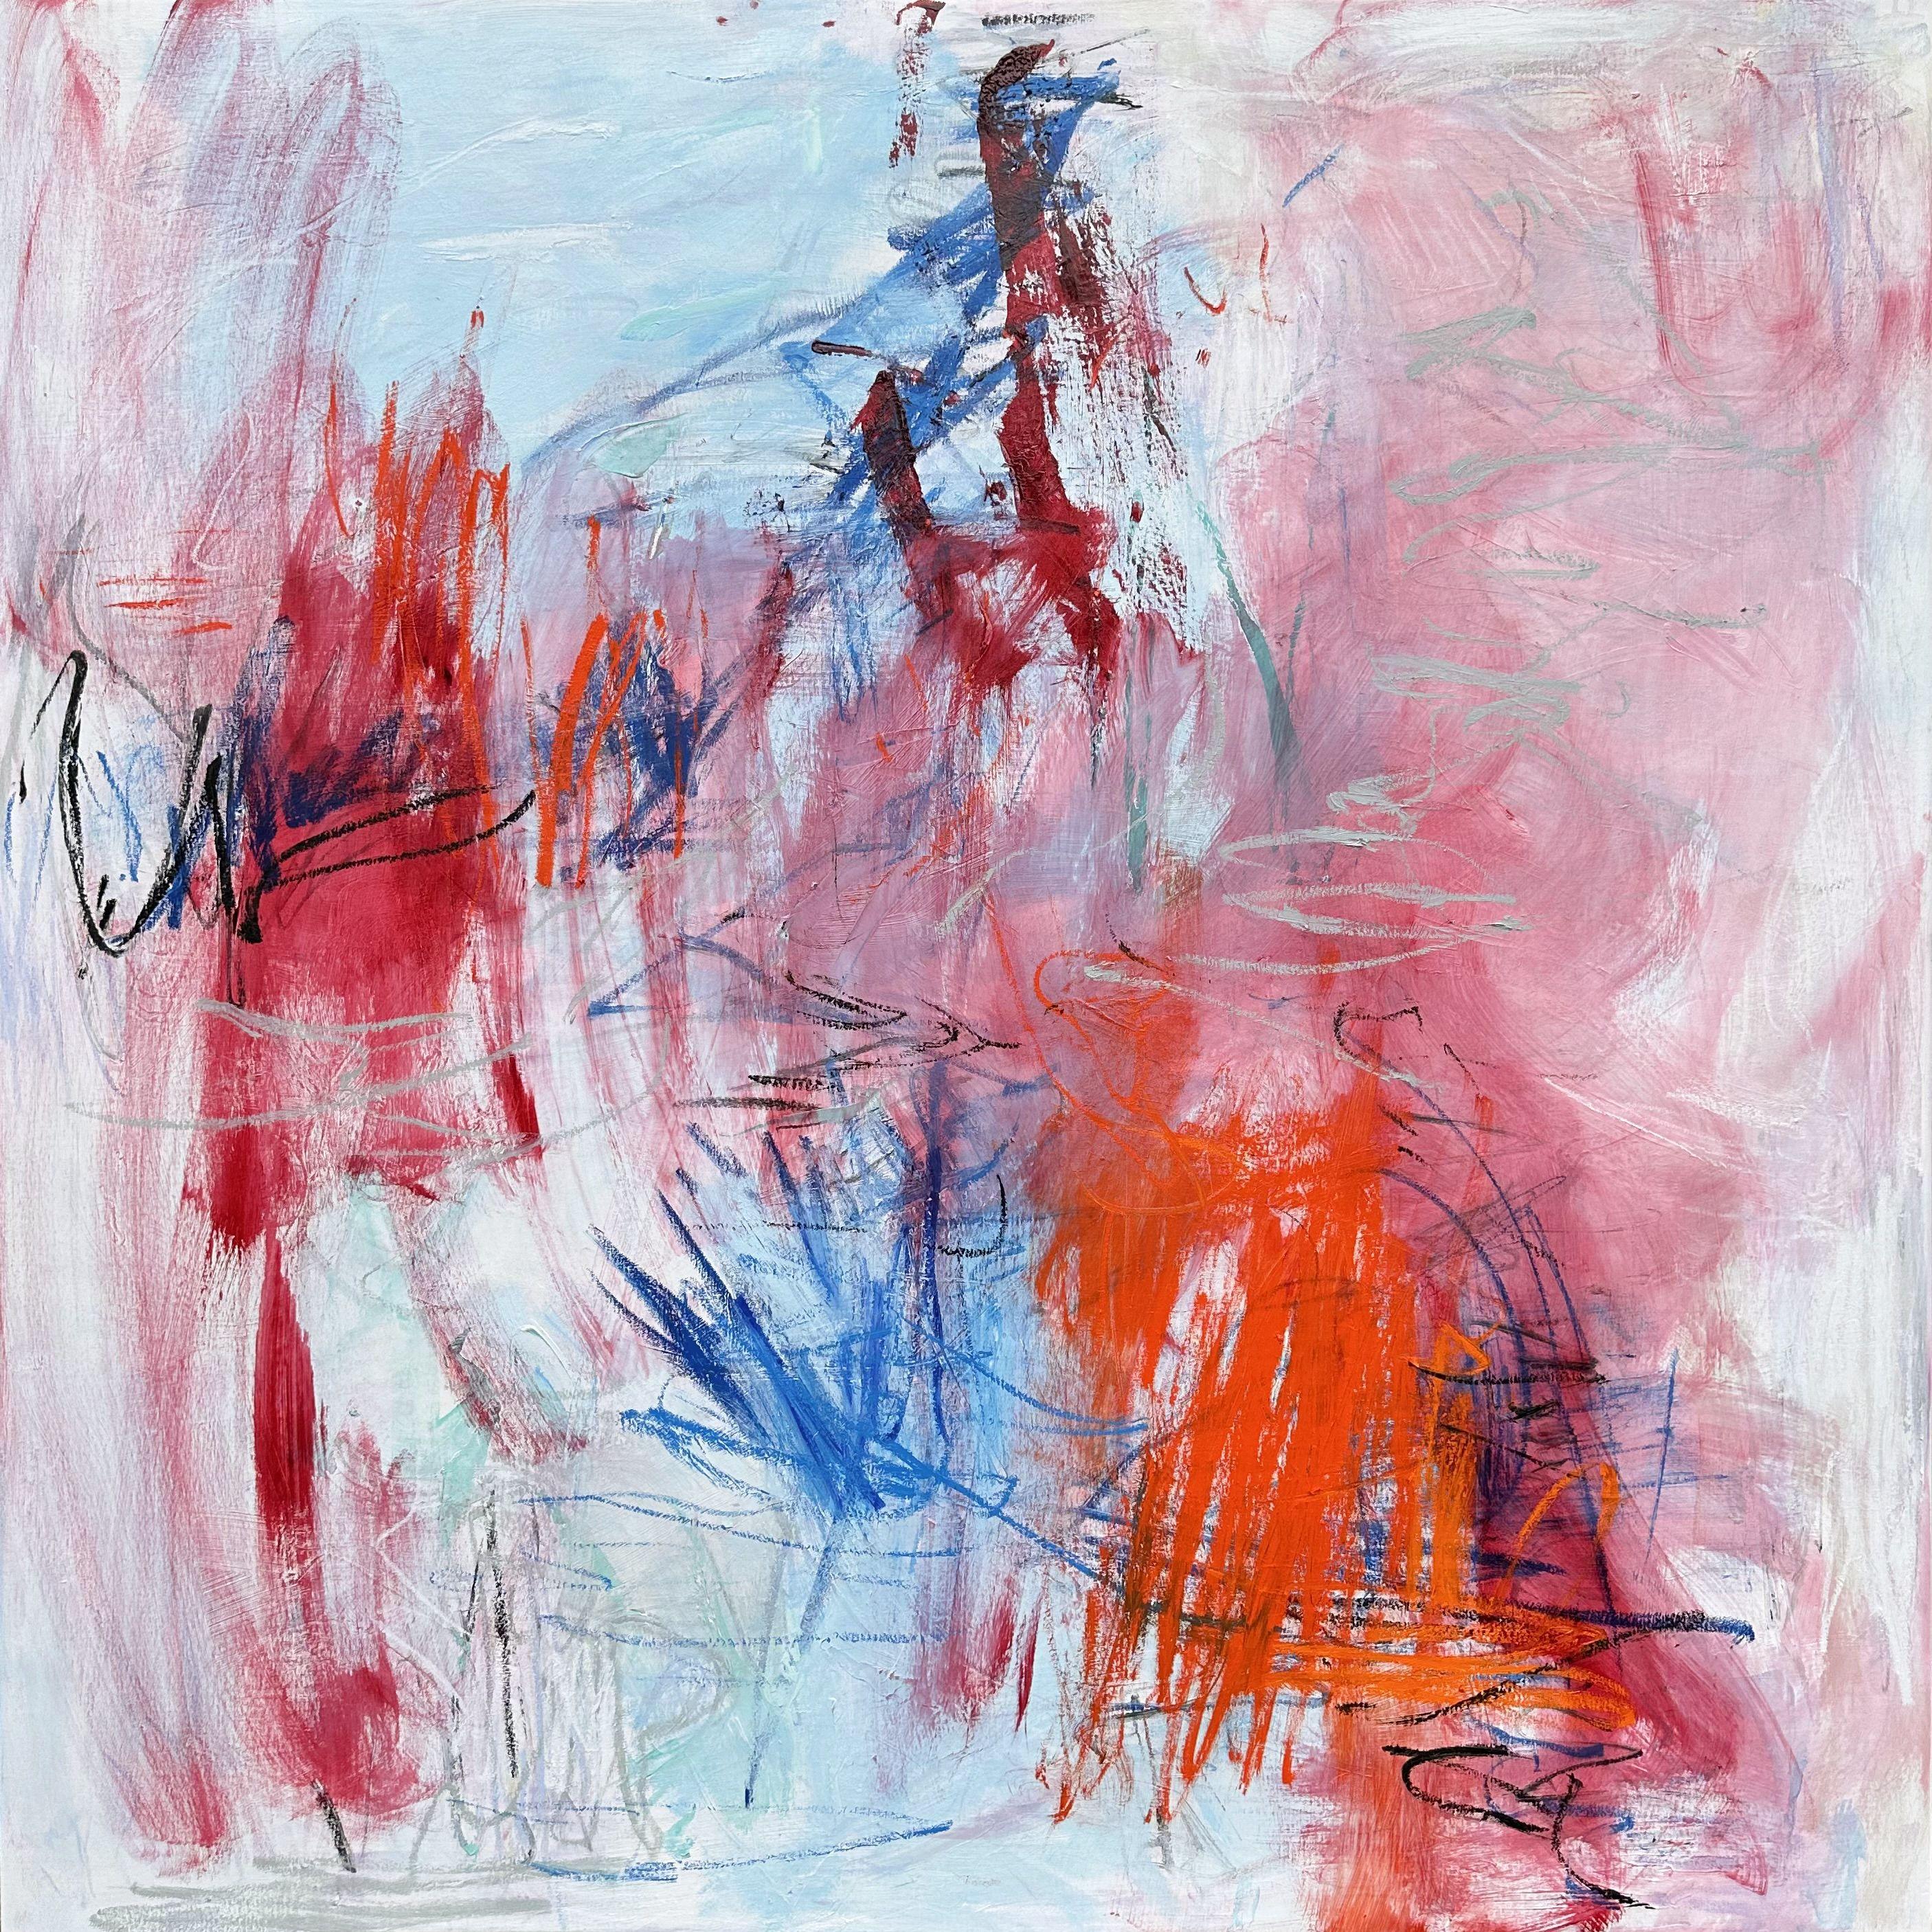 "Witness Statement" is a new dynamic abstract expressionist oil painting on canvas by Trixie Pitts. The painting is bright, intense, and totally captivating. The dynamic style, full of energy, almost seems like a cross between Twombly and Basquiat!